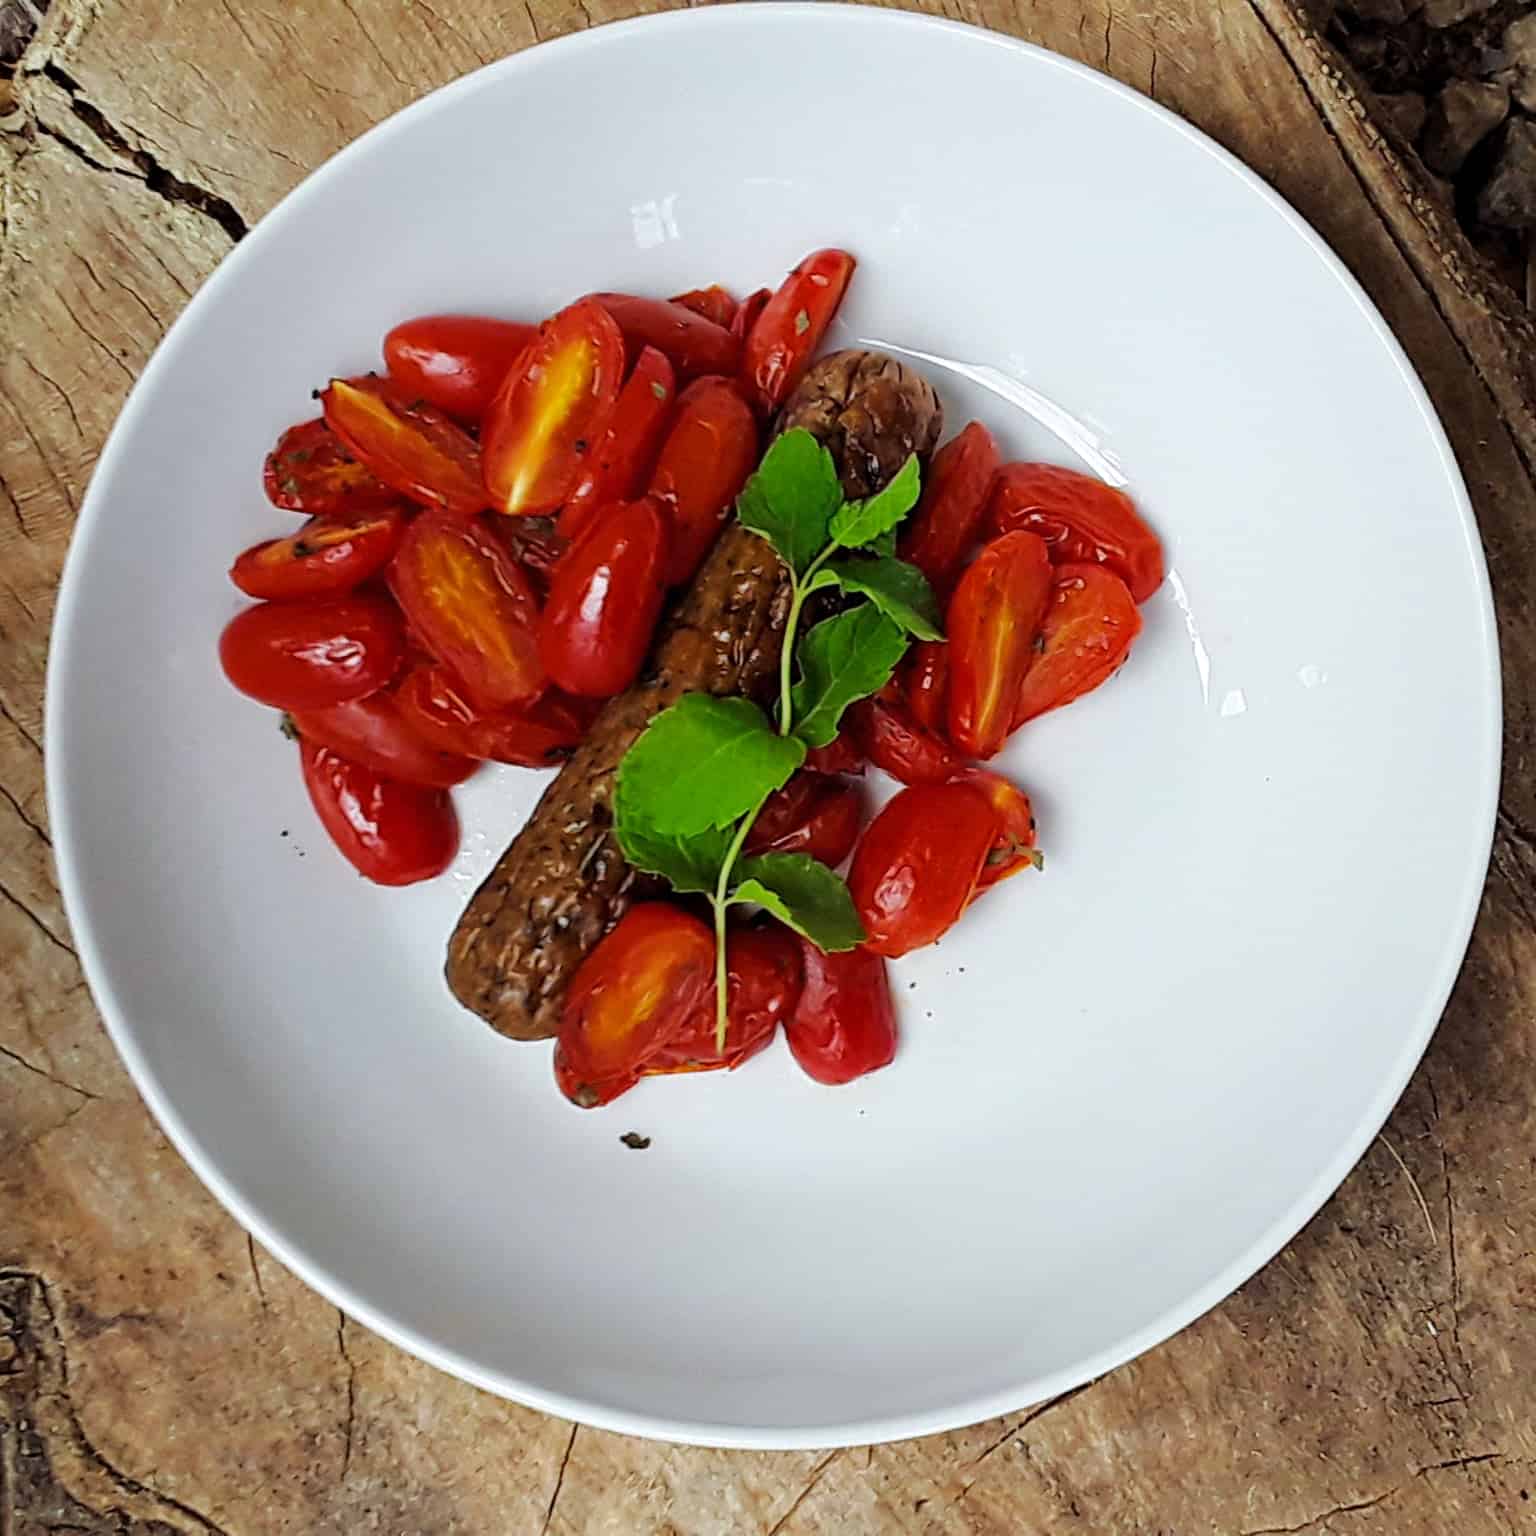 Spicy sausages with tomatoes on white plate garnished with fresh basil.